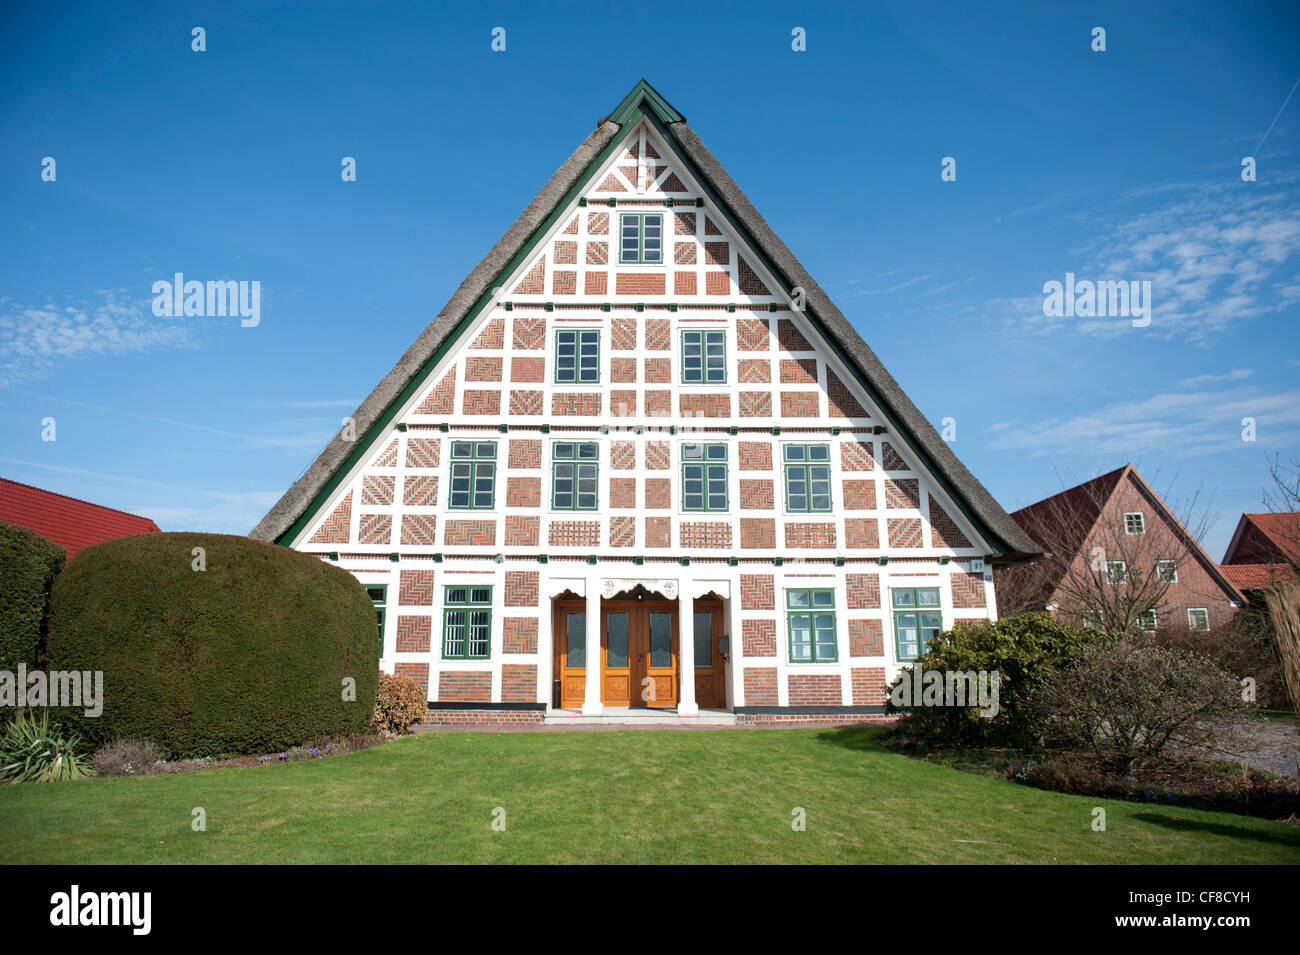 Red brick, white wood: typical half-timbered farmhouse at Jork in the fruit-growing Altes Land region in Lower Saxony, Germany Stock Photo